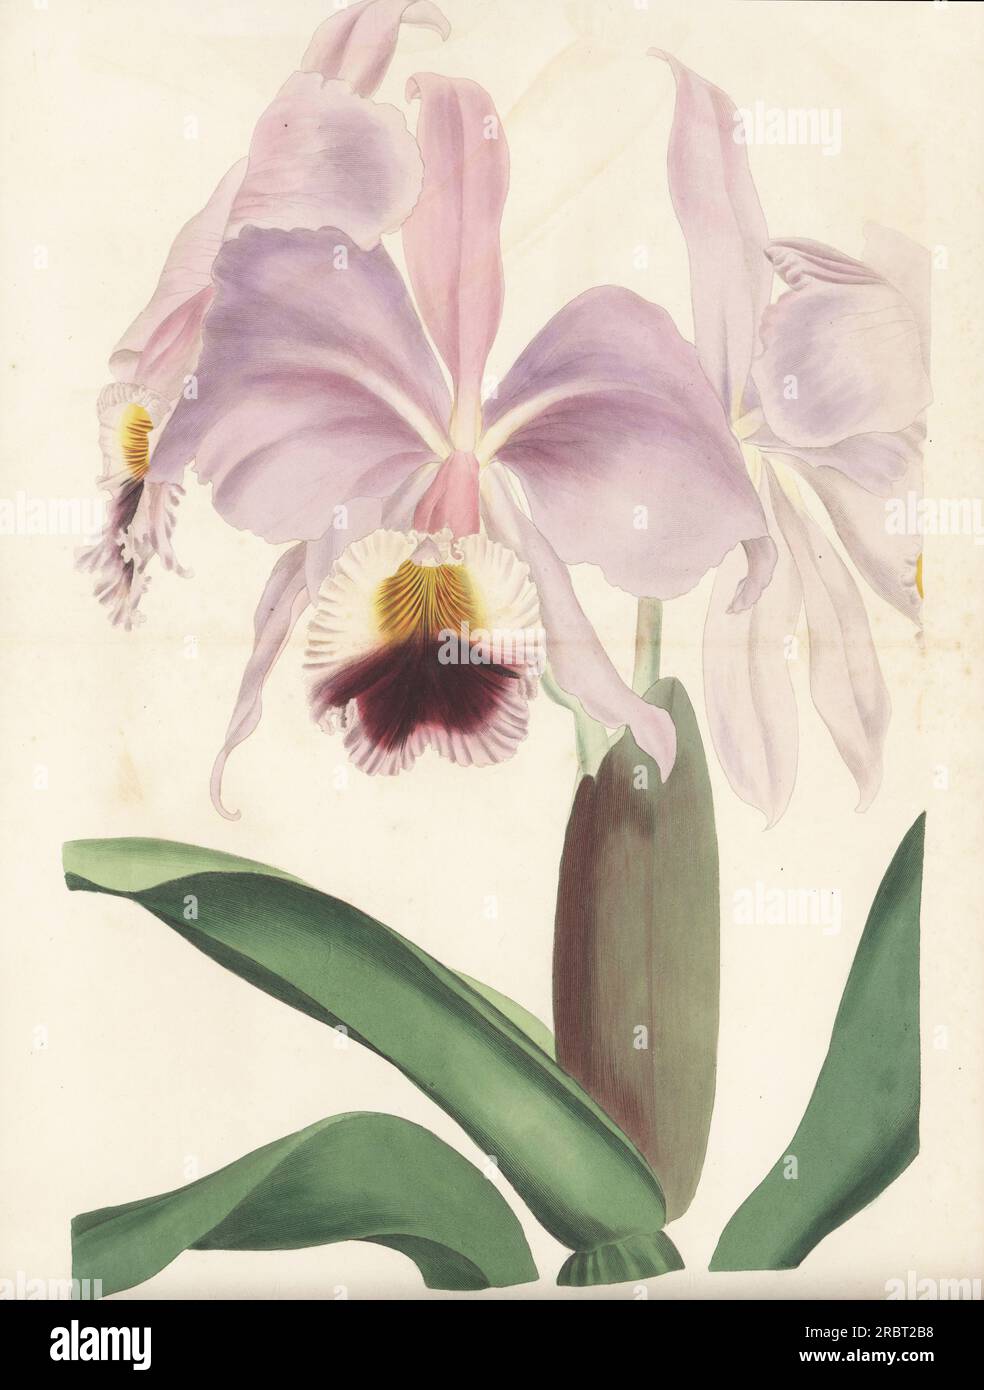 Crimson cattleya, ruby-lipped cattleya or crimson-lipped cattleya orchid, Cattleya labiata. Imported from Brazil by English ornithologist and artist William Swainson in 1818. Handcoloured engraving after a botanical illustration by Samuel Holden from Joseph Paxton’s Magazine of Botany, and Register of Flowering Plants, Volume 4, Orr and Smith, London, 1837. Stock Photo